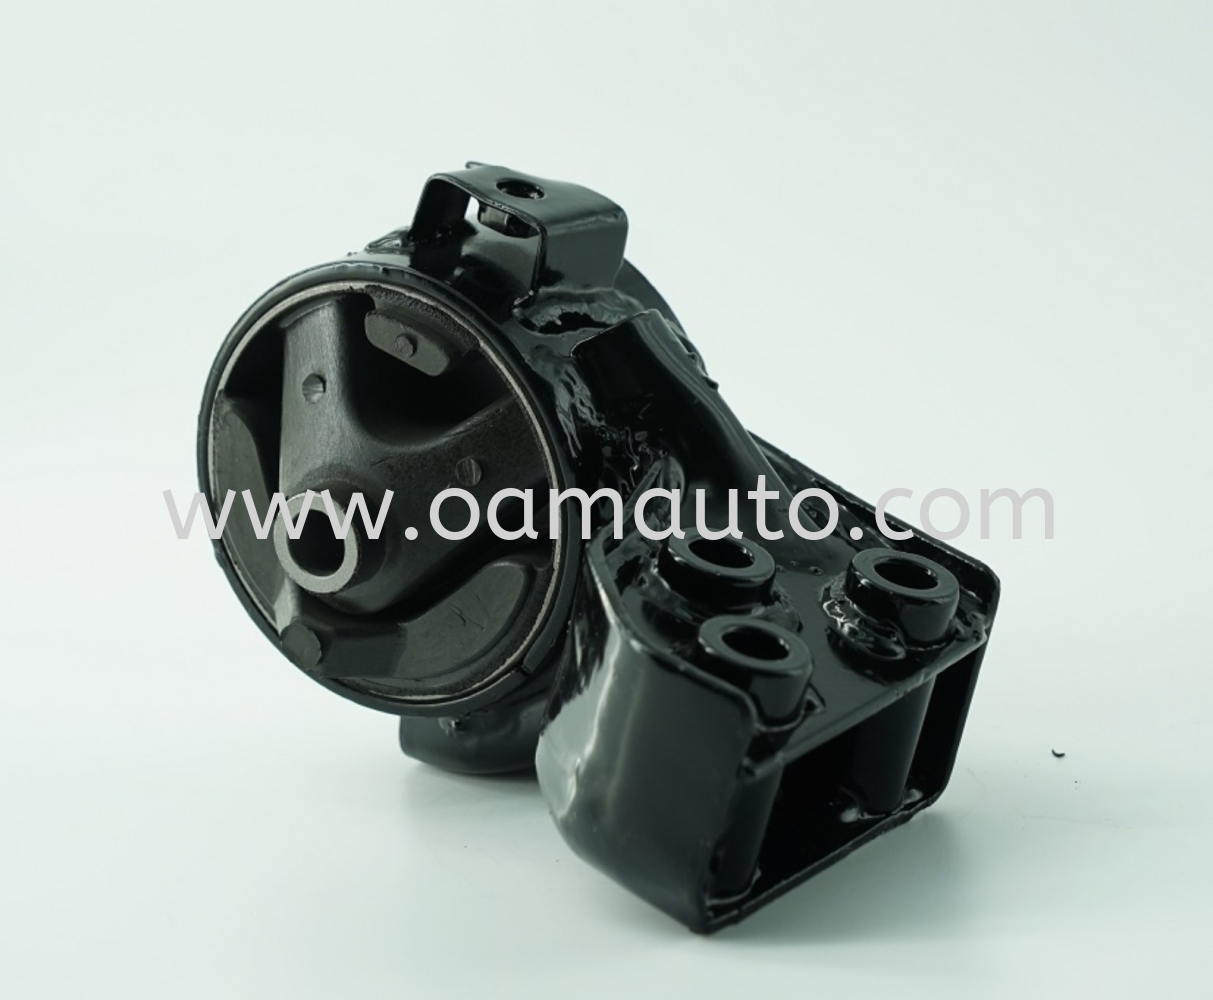 Engine Mounting (Available For European Vehicles: Volkswagen, Citeroen, Audi, Mercedes, BMW, Ford, Chevrolet, Peugeot, Fiat)